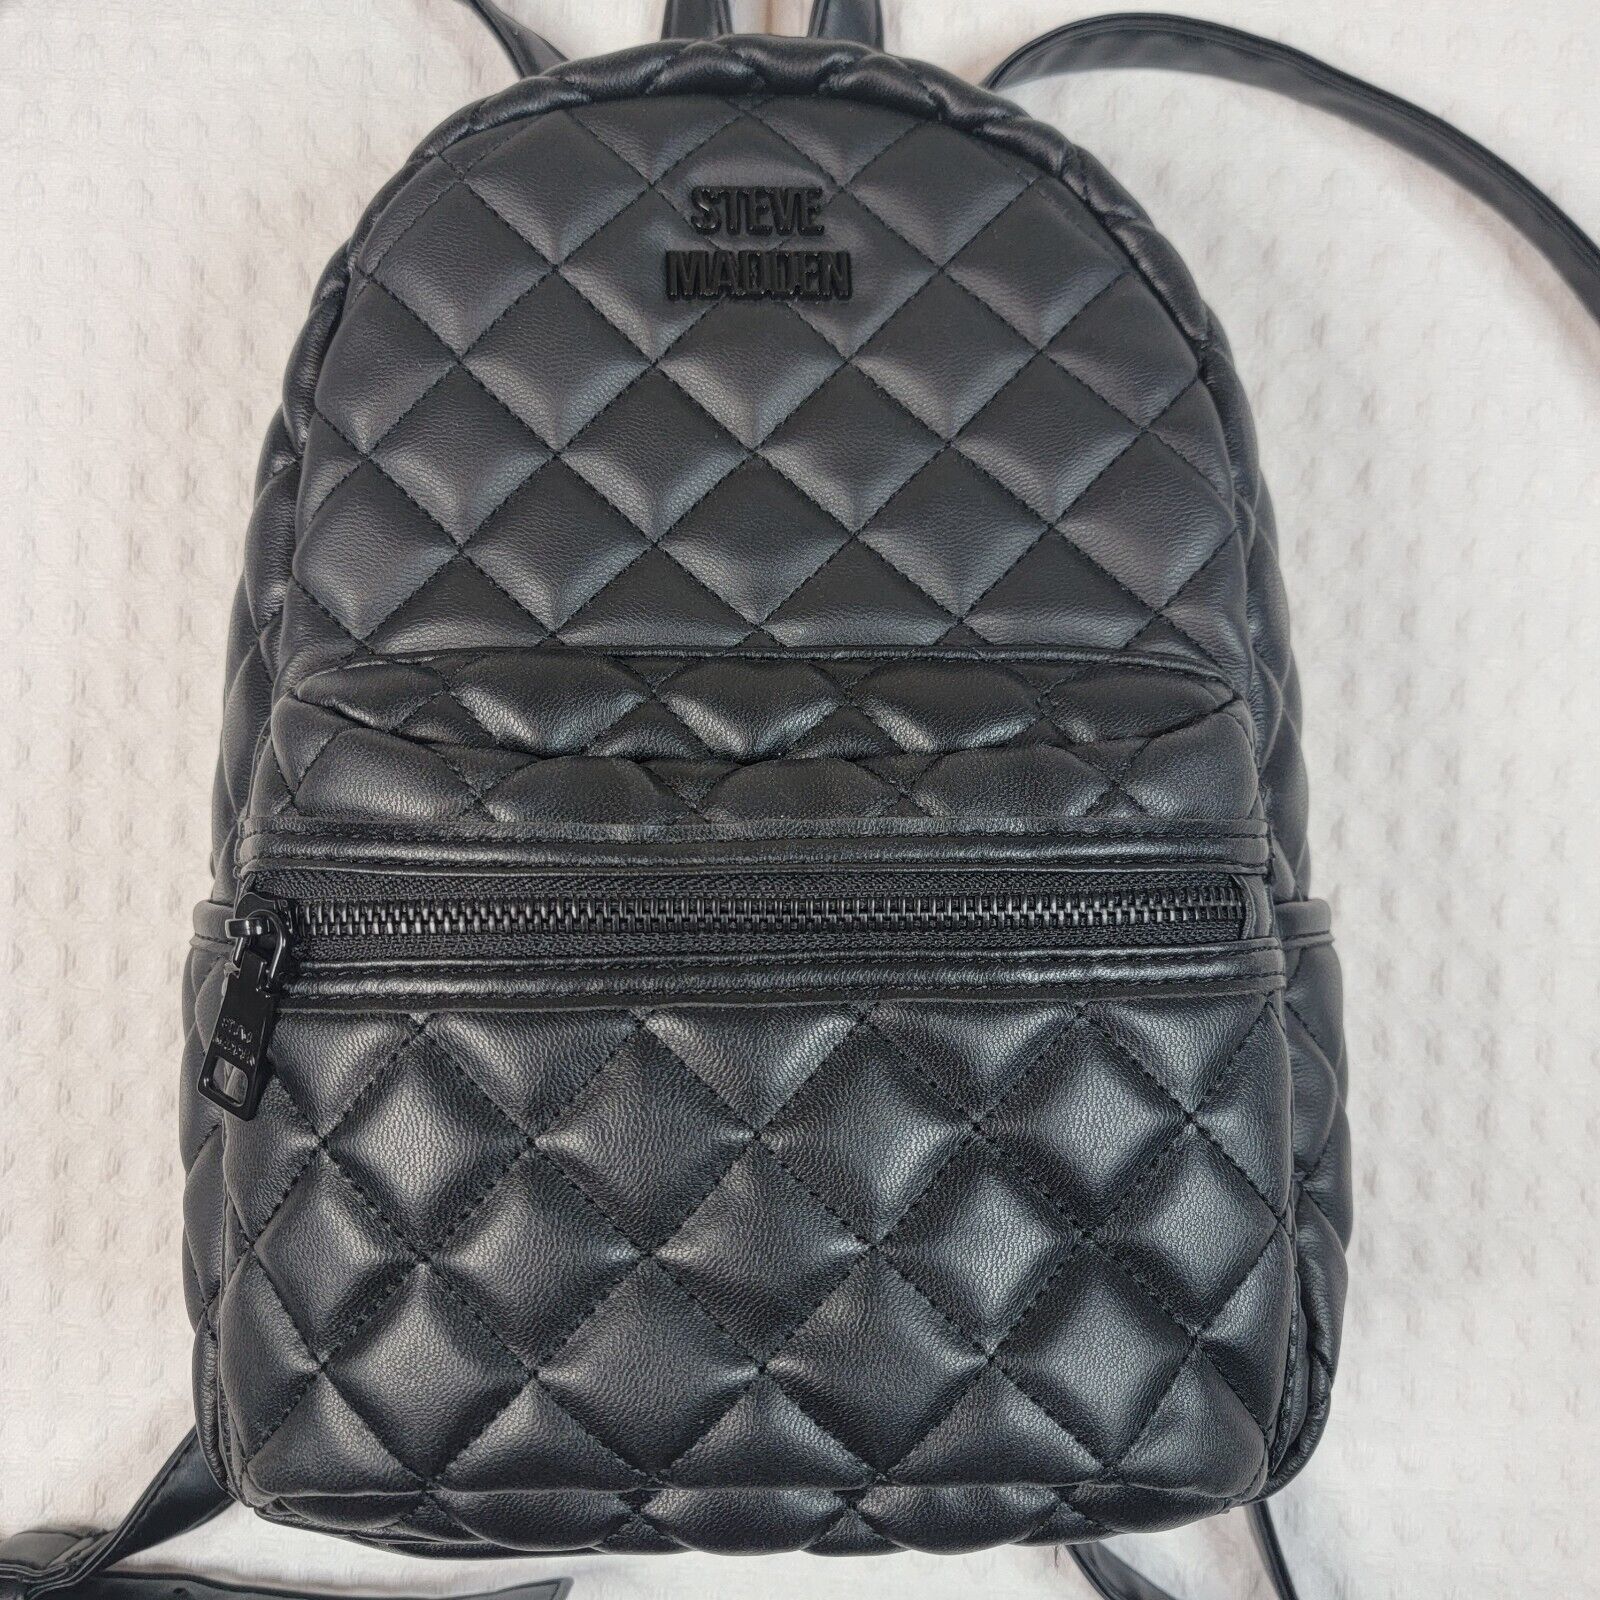 Steve Madden 'MIA' Diamond Quilted Faux Leather Backpack Black Hardware Small